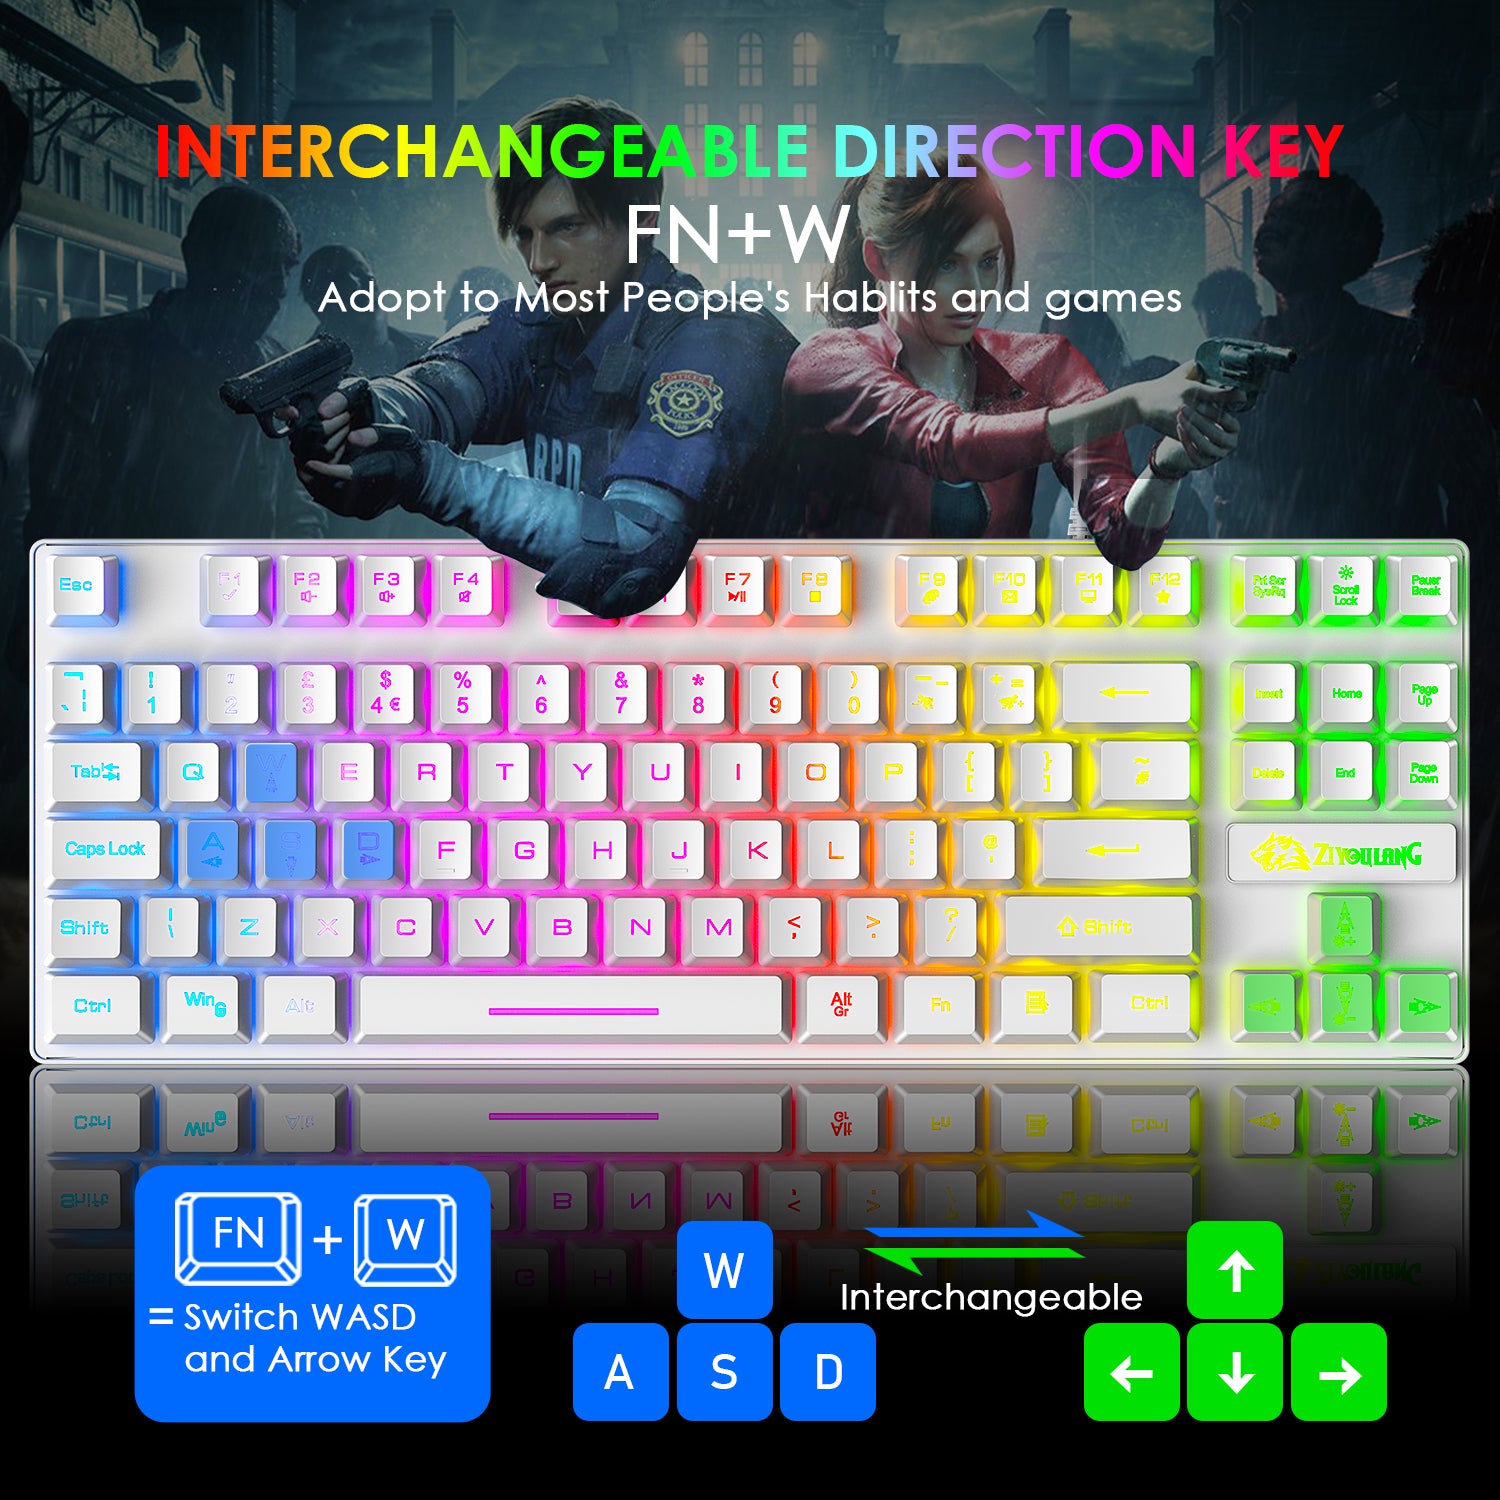 ZIYOU LANG T2 Gaming Keyboard and Mouse, Mechanical Feel Keyboard,RGB 6400 DPI Lightweight Gaming Mouse for Windows PC Gamers